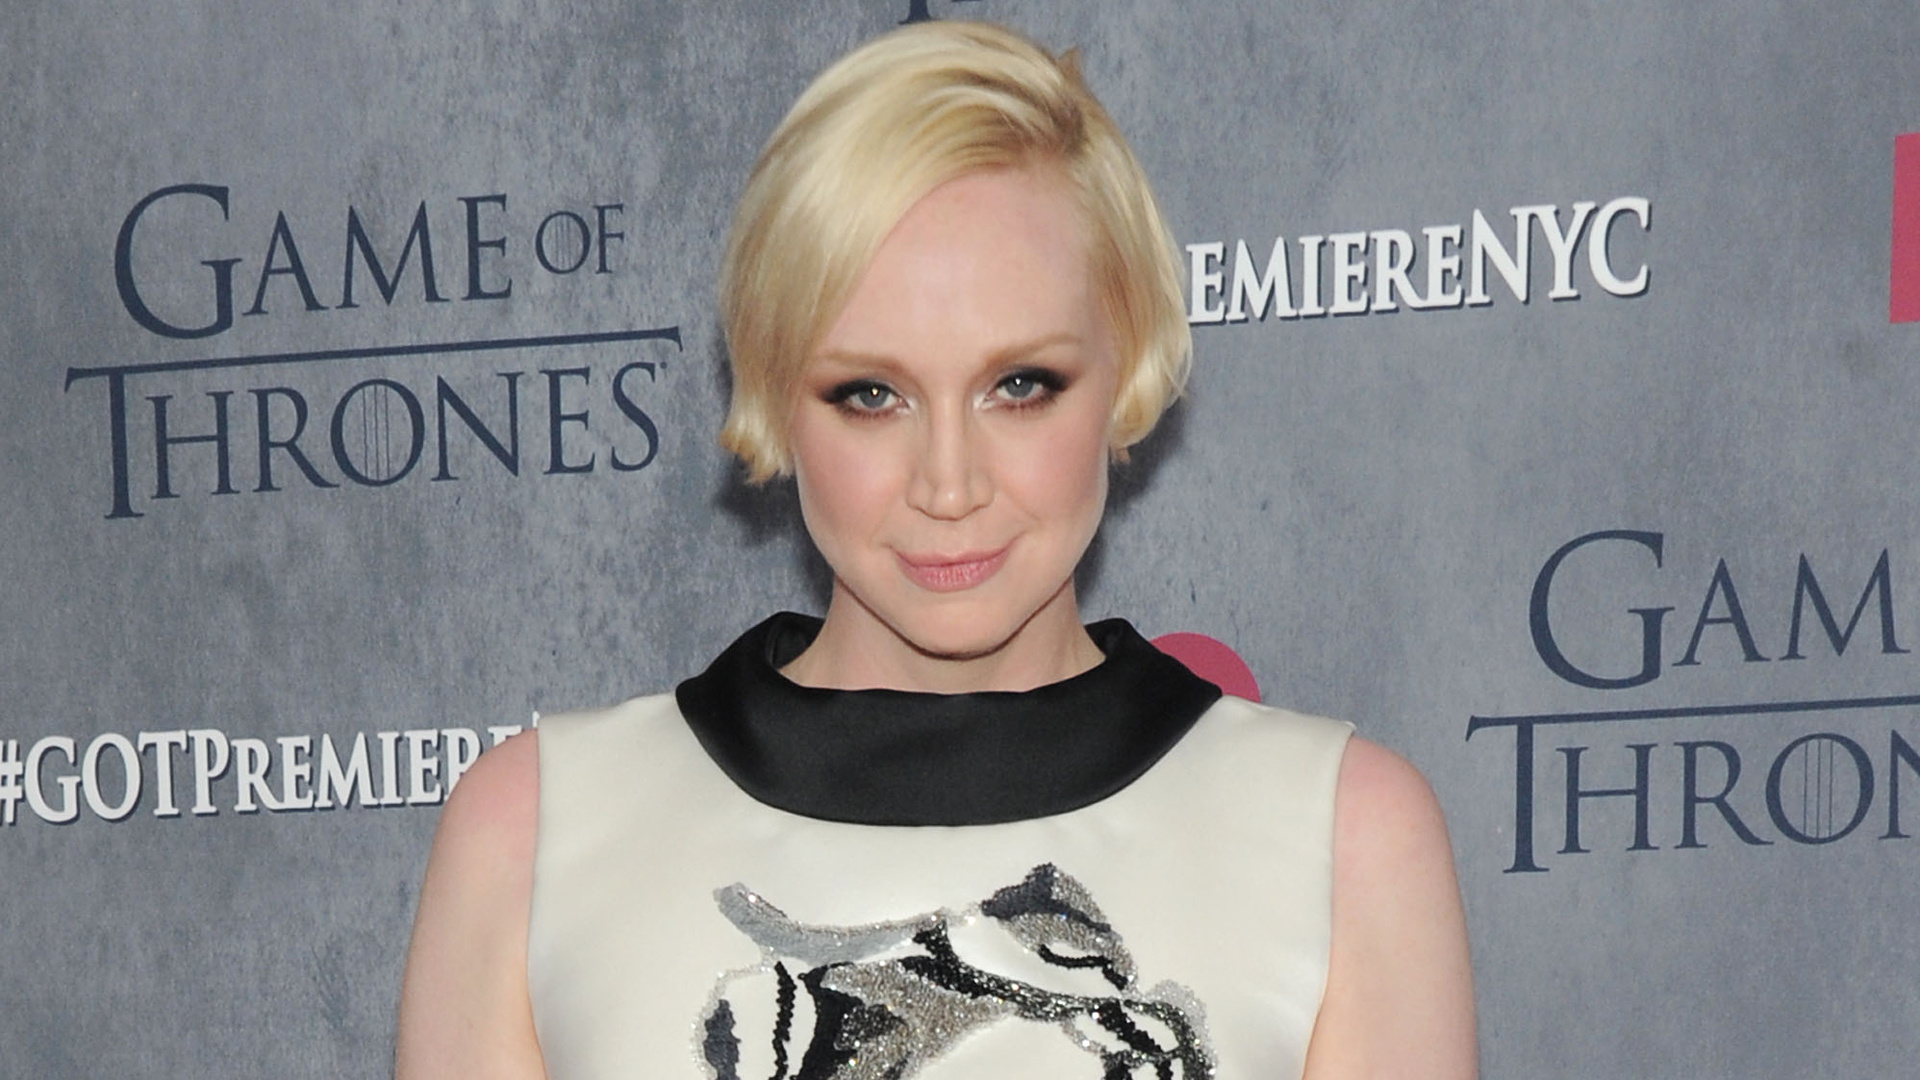 Gwendoline Christie, Hunger Games role, Variety exclusive, Acting talent, 1920x1080 Full HD Desktop